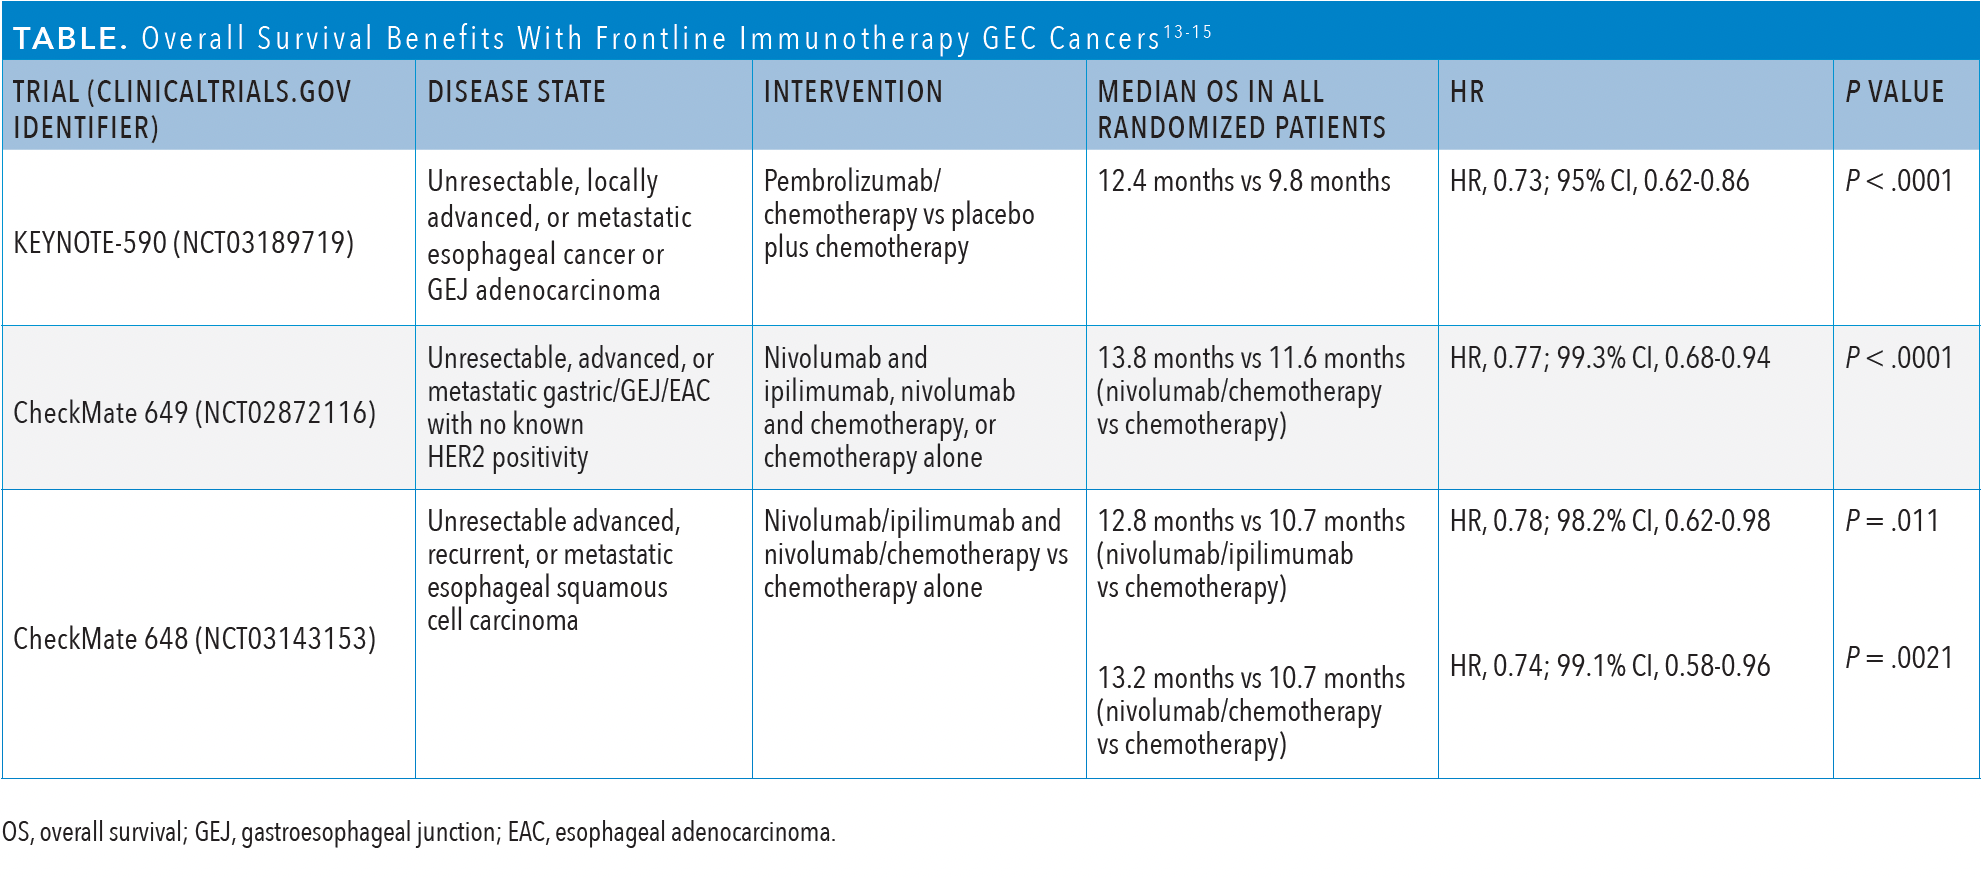 Table. Overall Survival Benefits With Frontline Immunotherapy GEC Cancers13-15